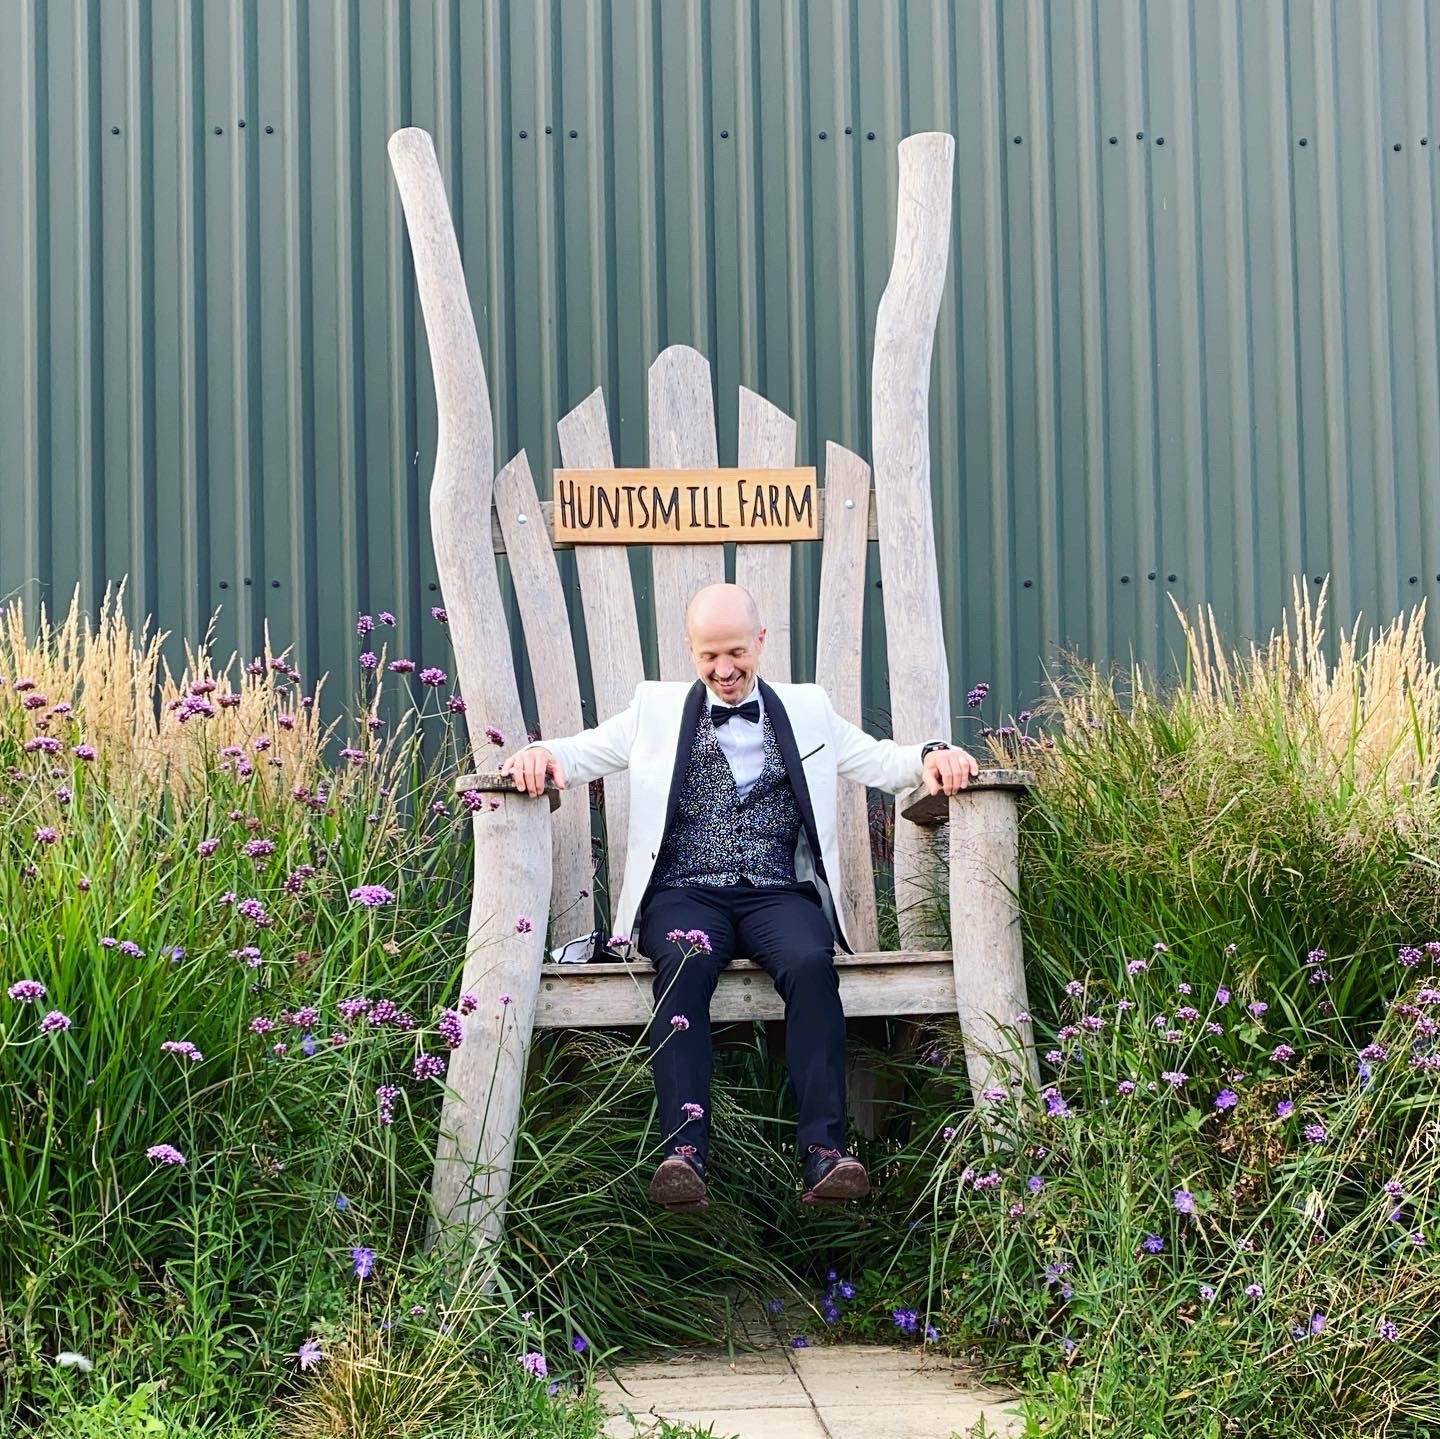 The naughty chair at Huntsmill Farm!